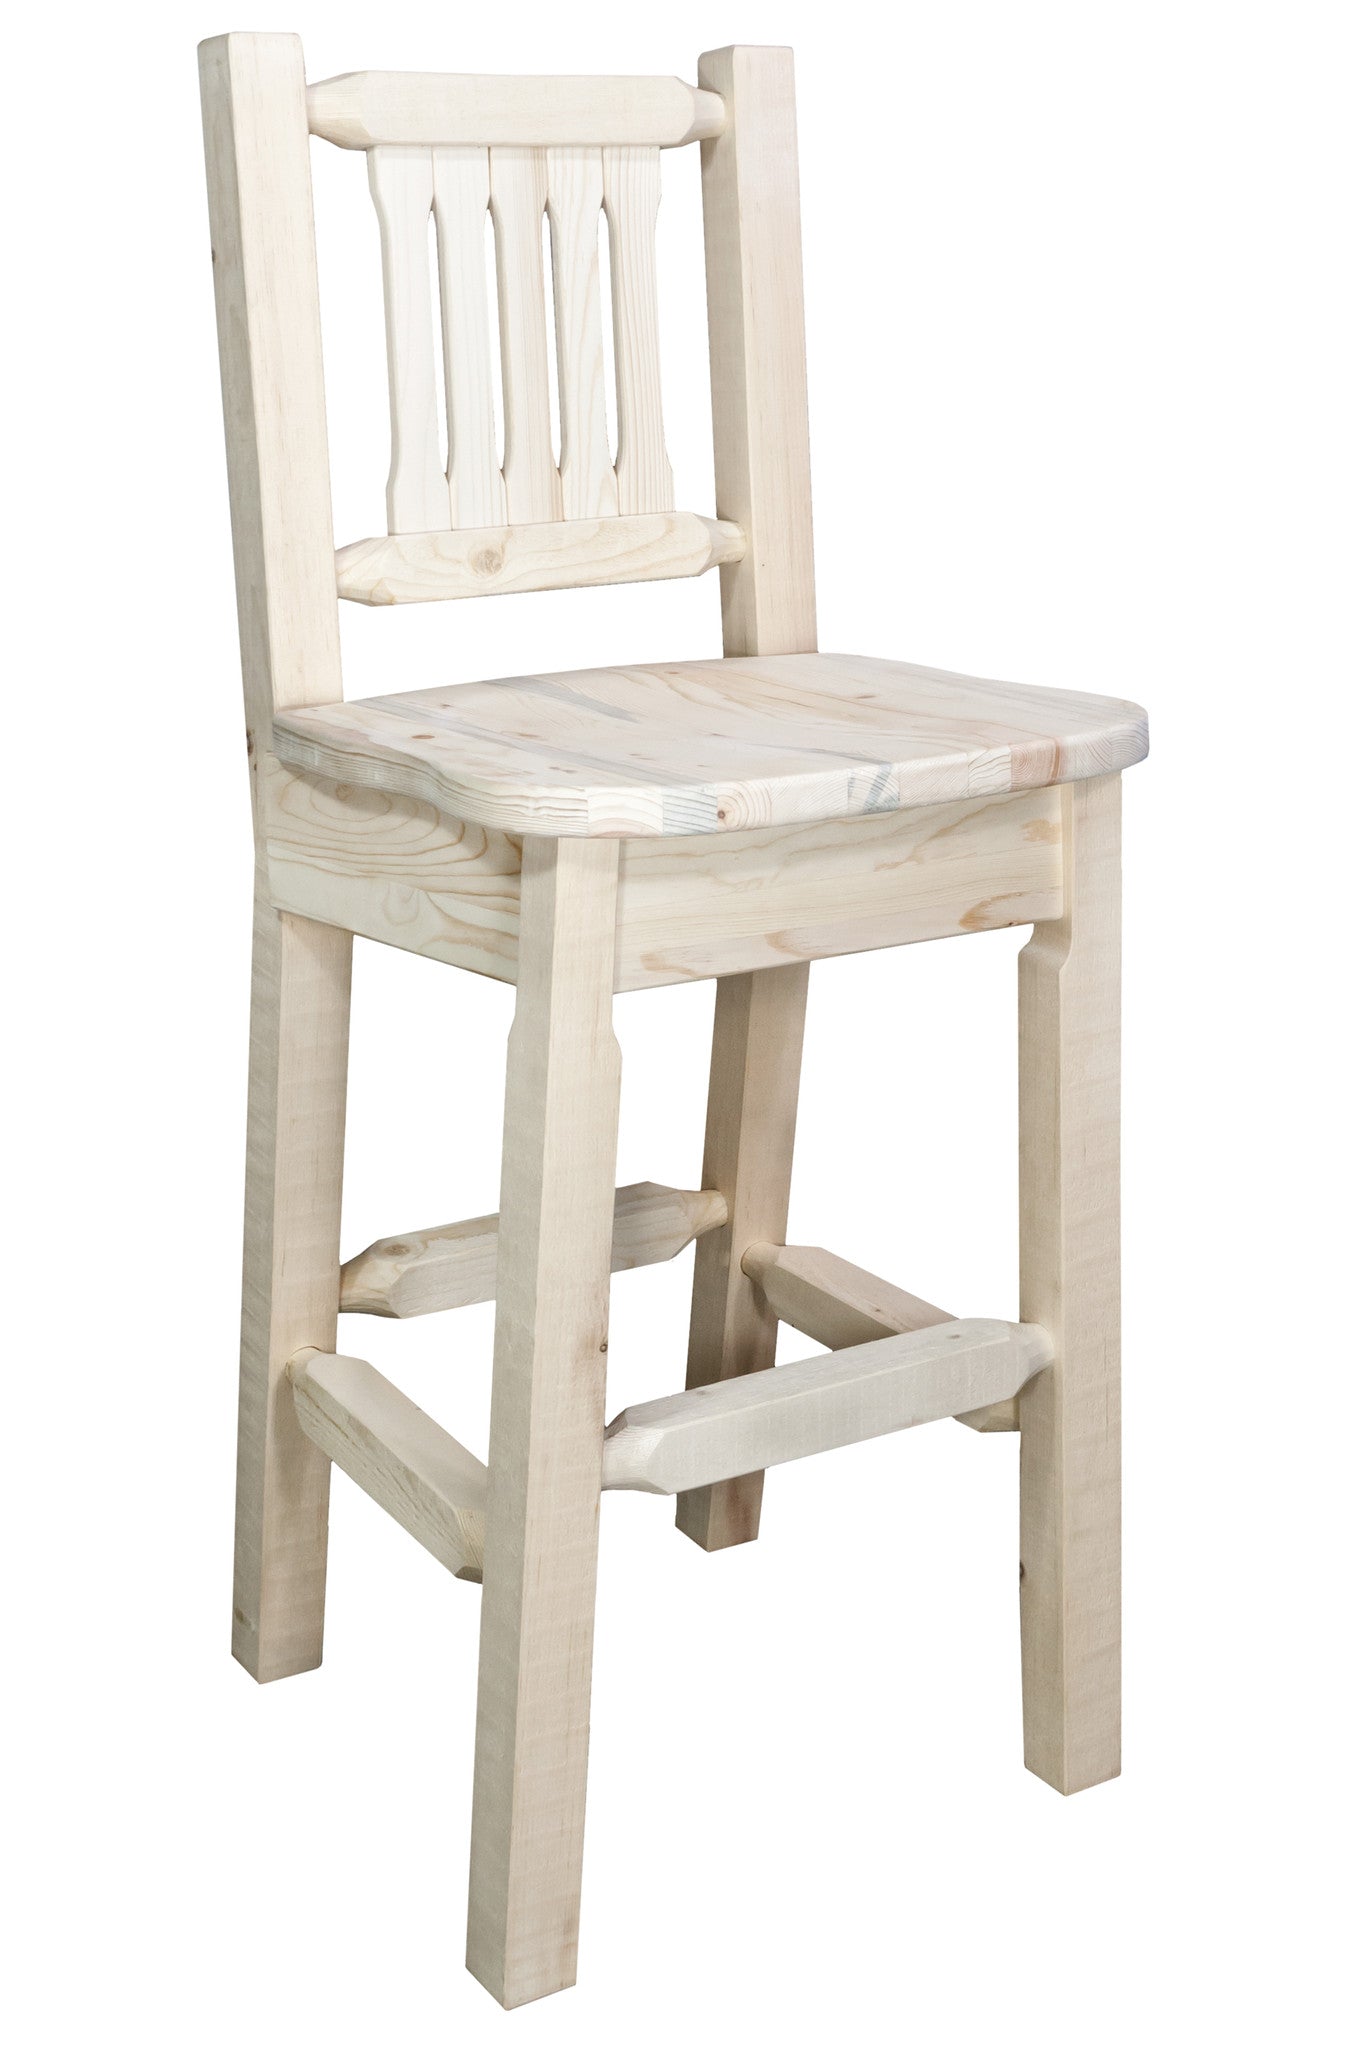 Montana Woodworks Homestead Collection Wood Barstool w/ Back w/ Ergonomic Wooden Seat